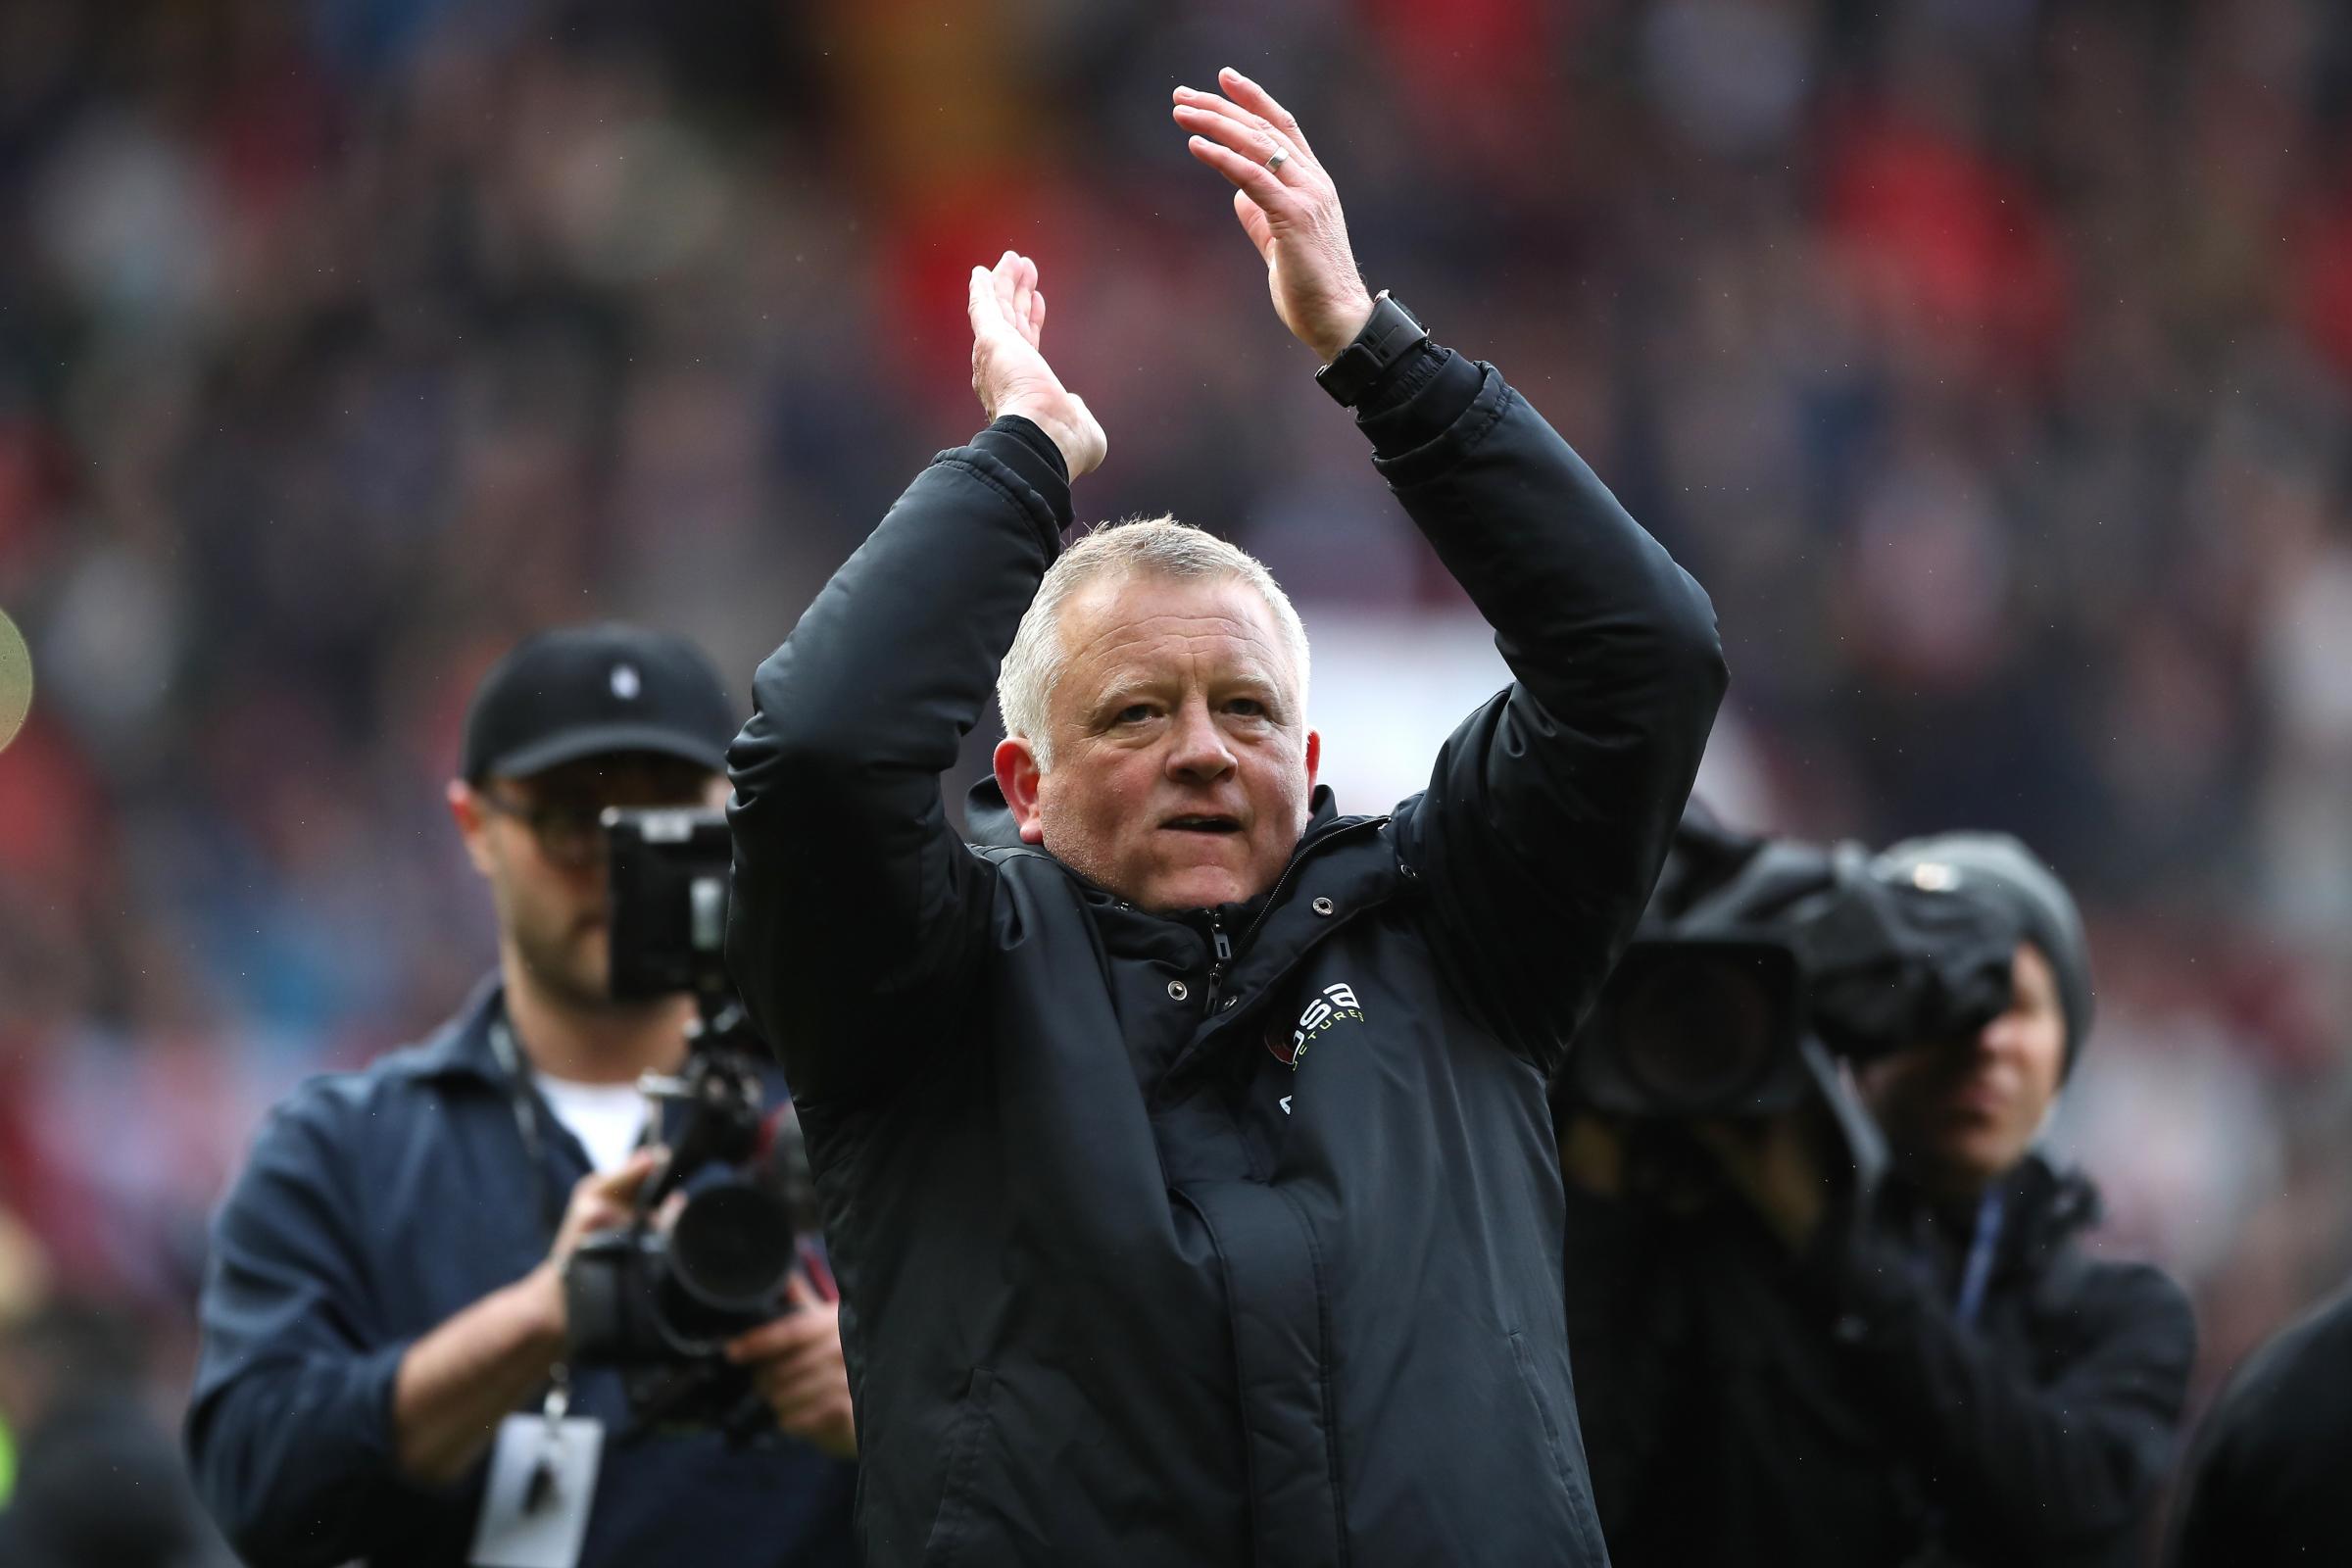 Chris Wilder eyeing Premier League promotion with Boro as he 'dares to dream'